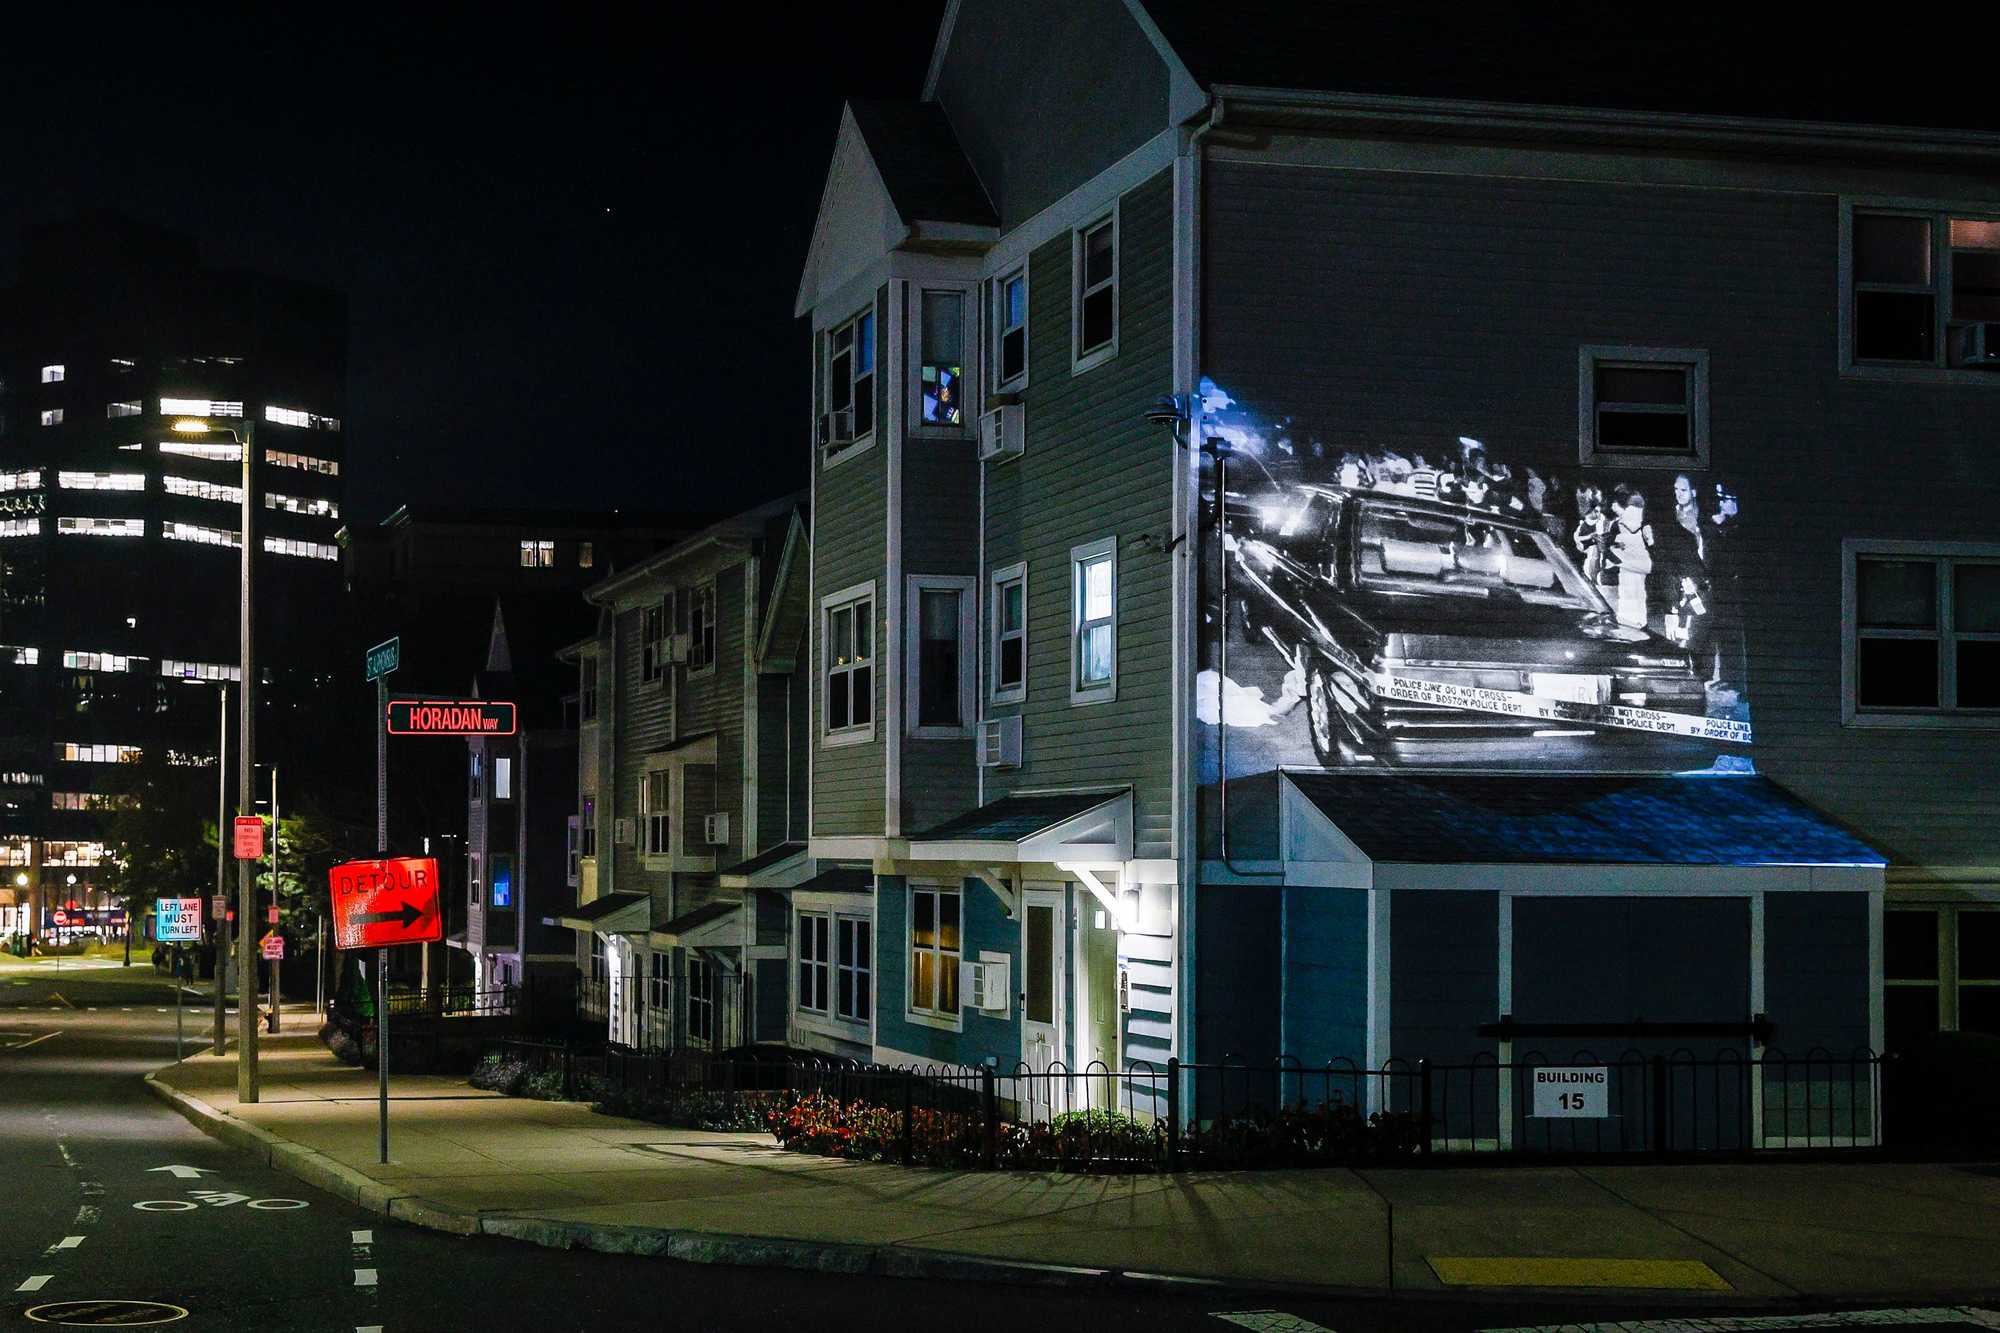 A photo of Charles Stuart’s car and the resulting crime scene is projected on St. Alphonsus Street and Horadan Way, near where Carol and Charles Stuart were found shot on the night of Oct. 23, 1989. 
